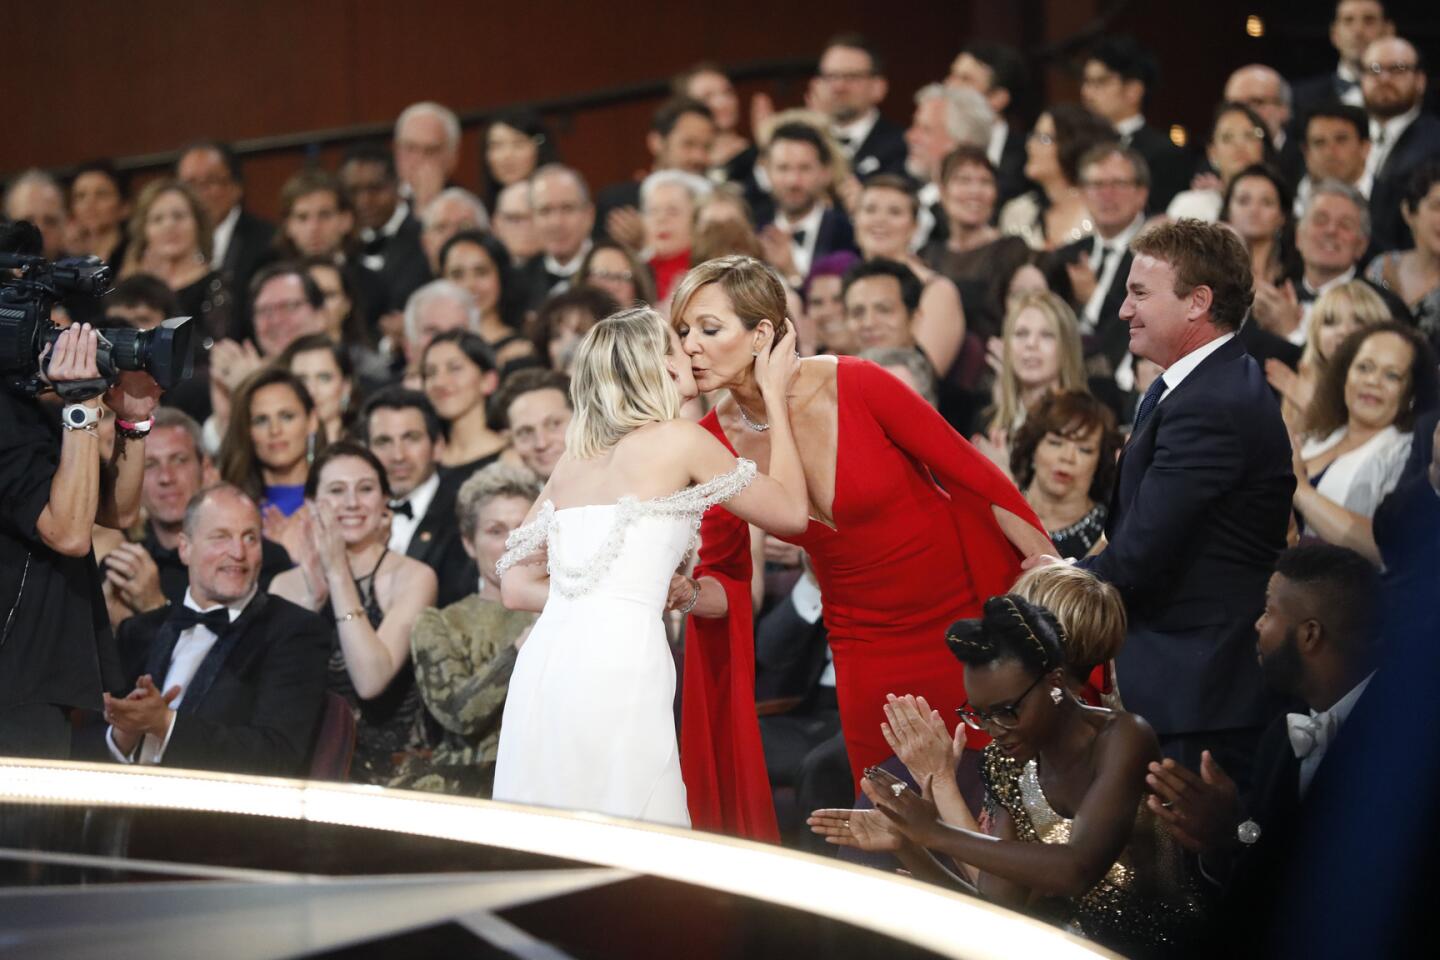 Allison Janney hugs Margot Robbie after Janney won for supporting actress for "I, Tonya," from backstage at the 90th Academy Awards on Sunday at the Dolby Theatre in Hollywood.